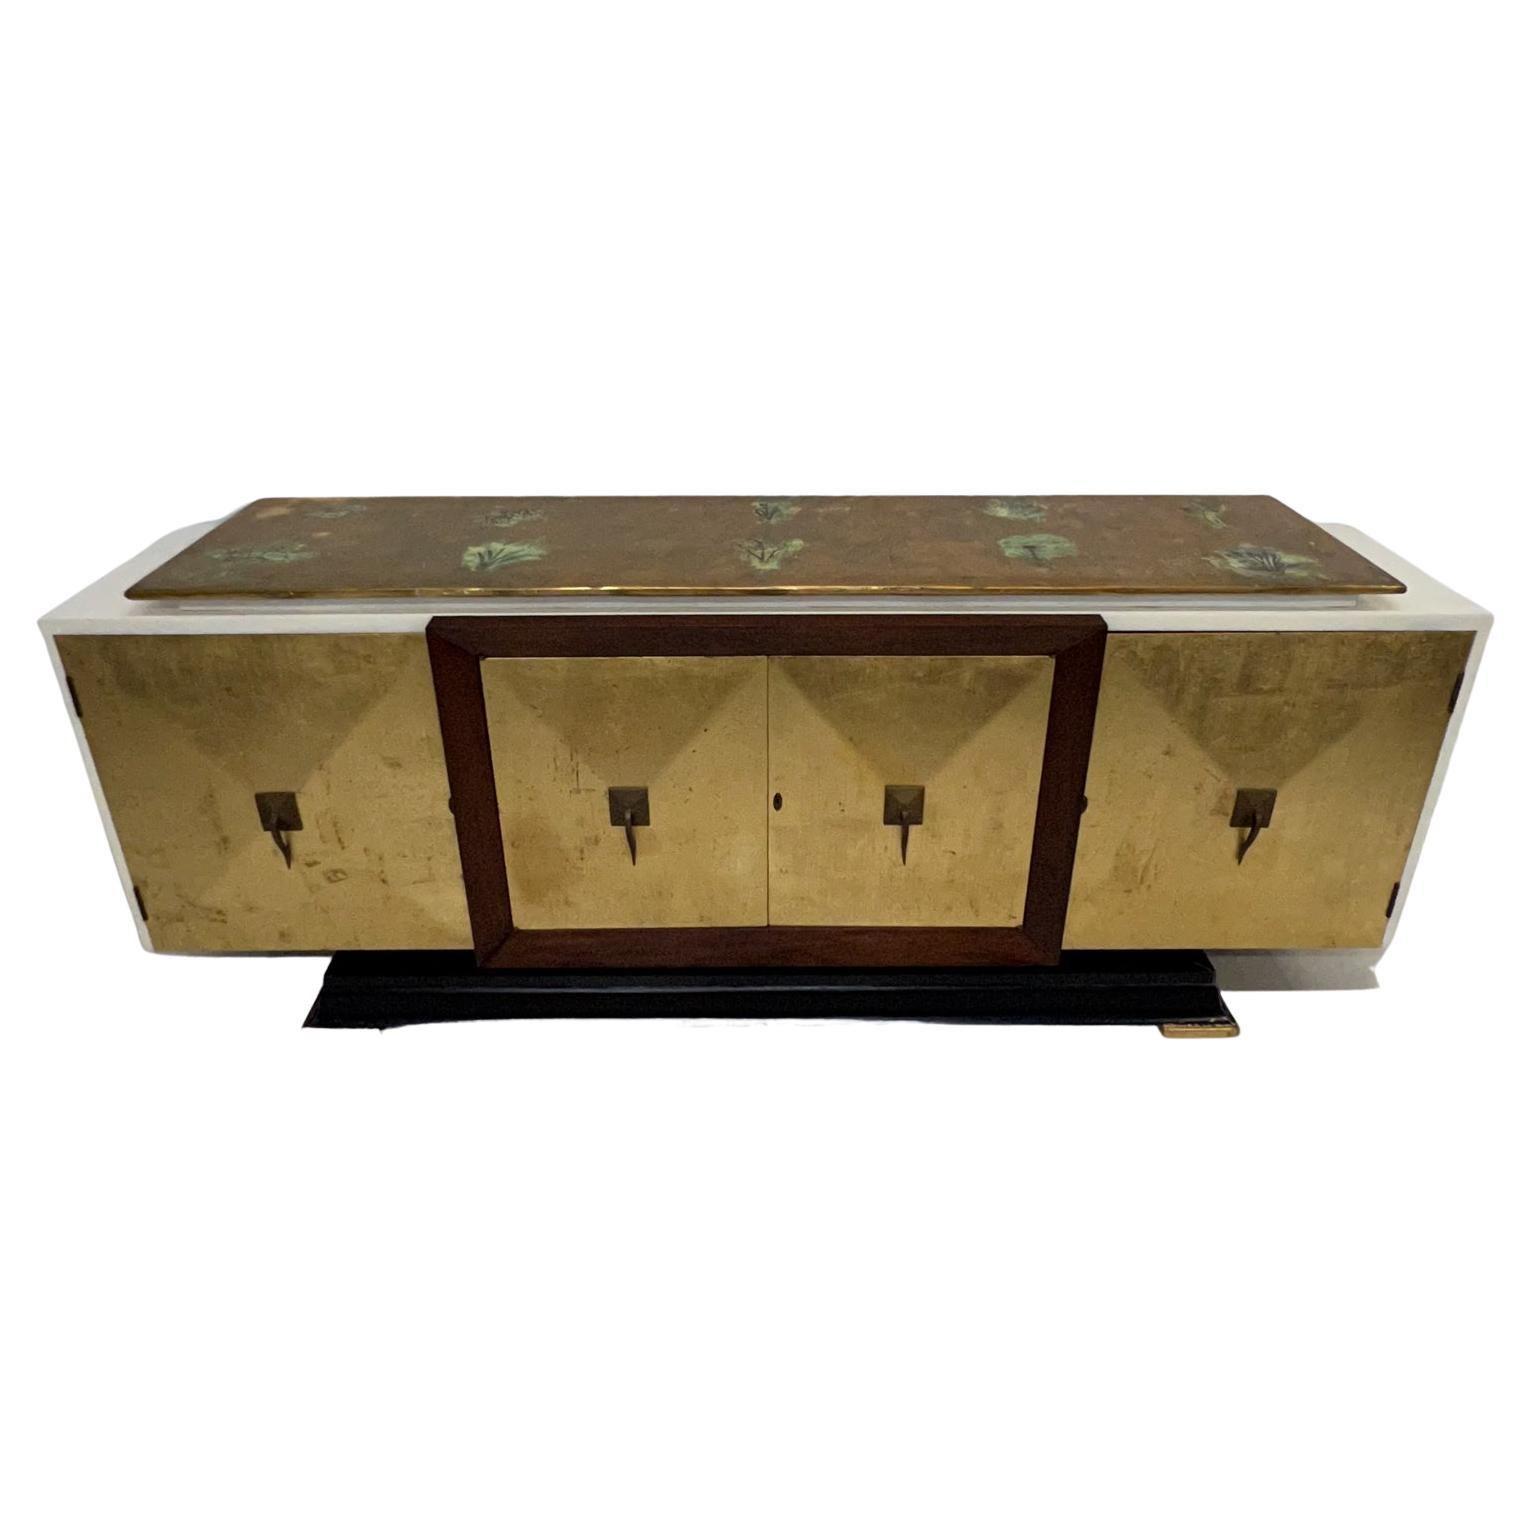 1950s Modern Neoclassical Gold Leaf Credenza Mahogany Wood and Brass Mexico